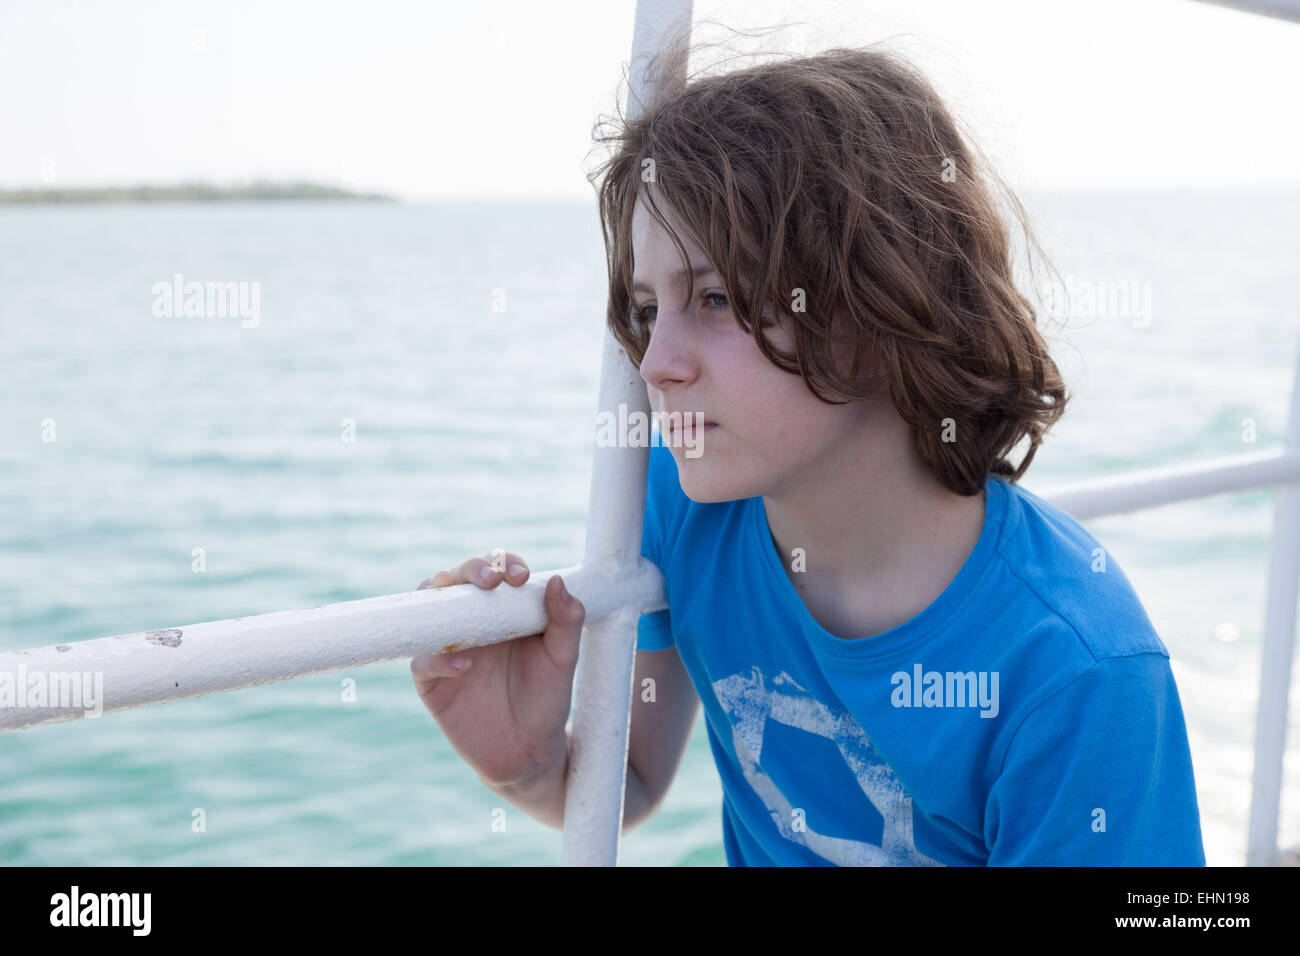 Boy in a boat on holidays. Stock Photo